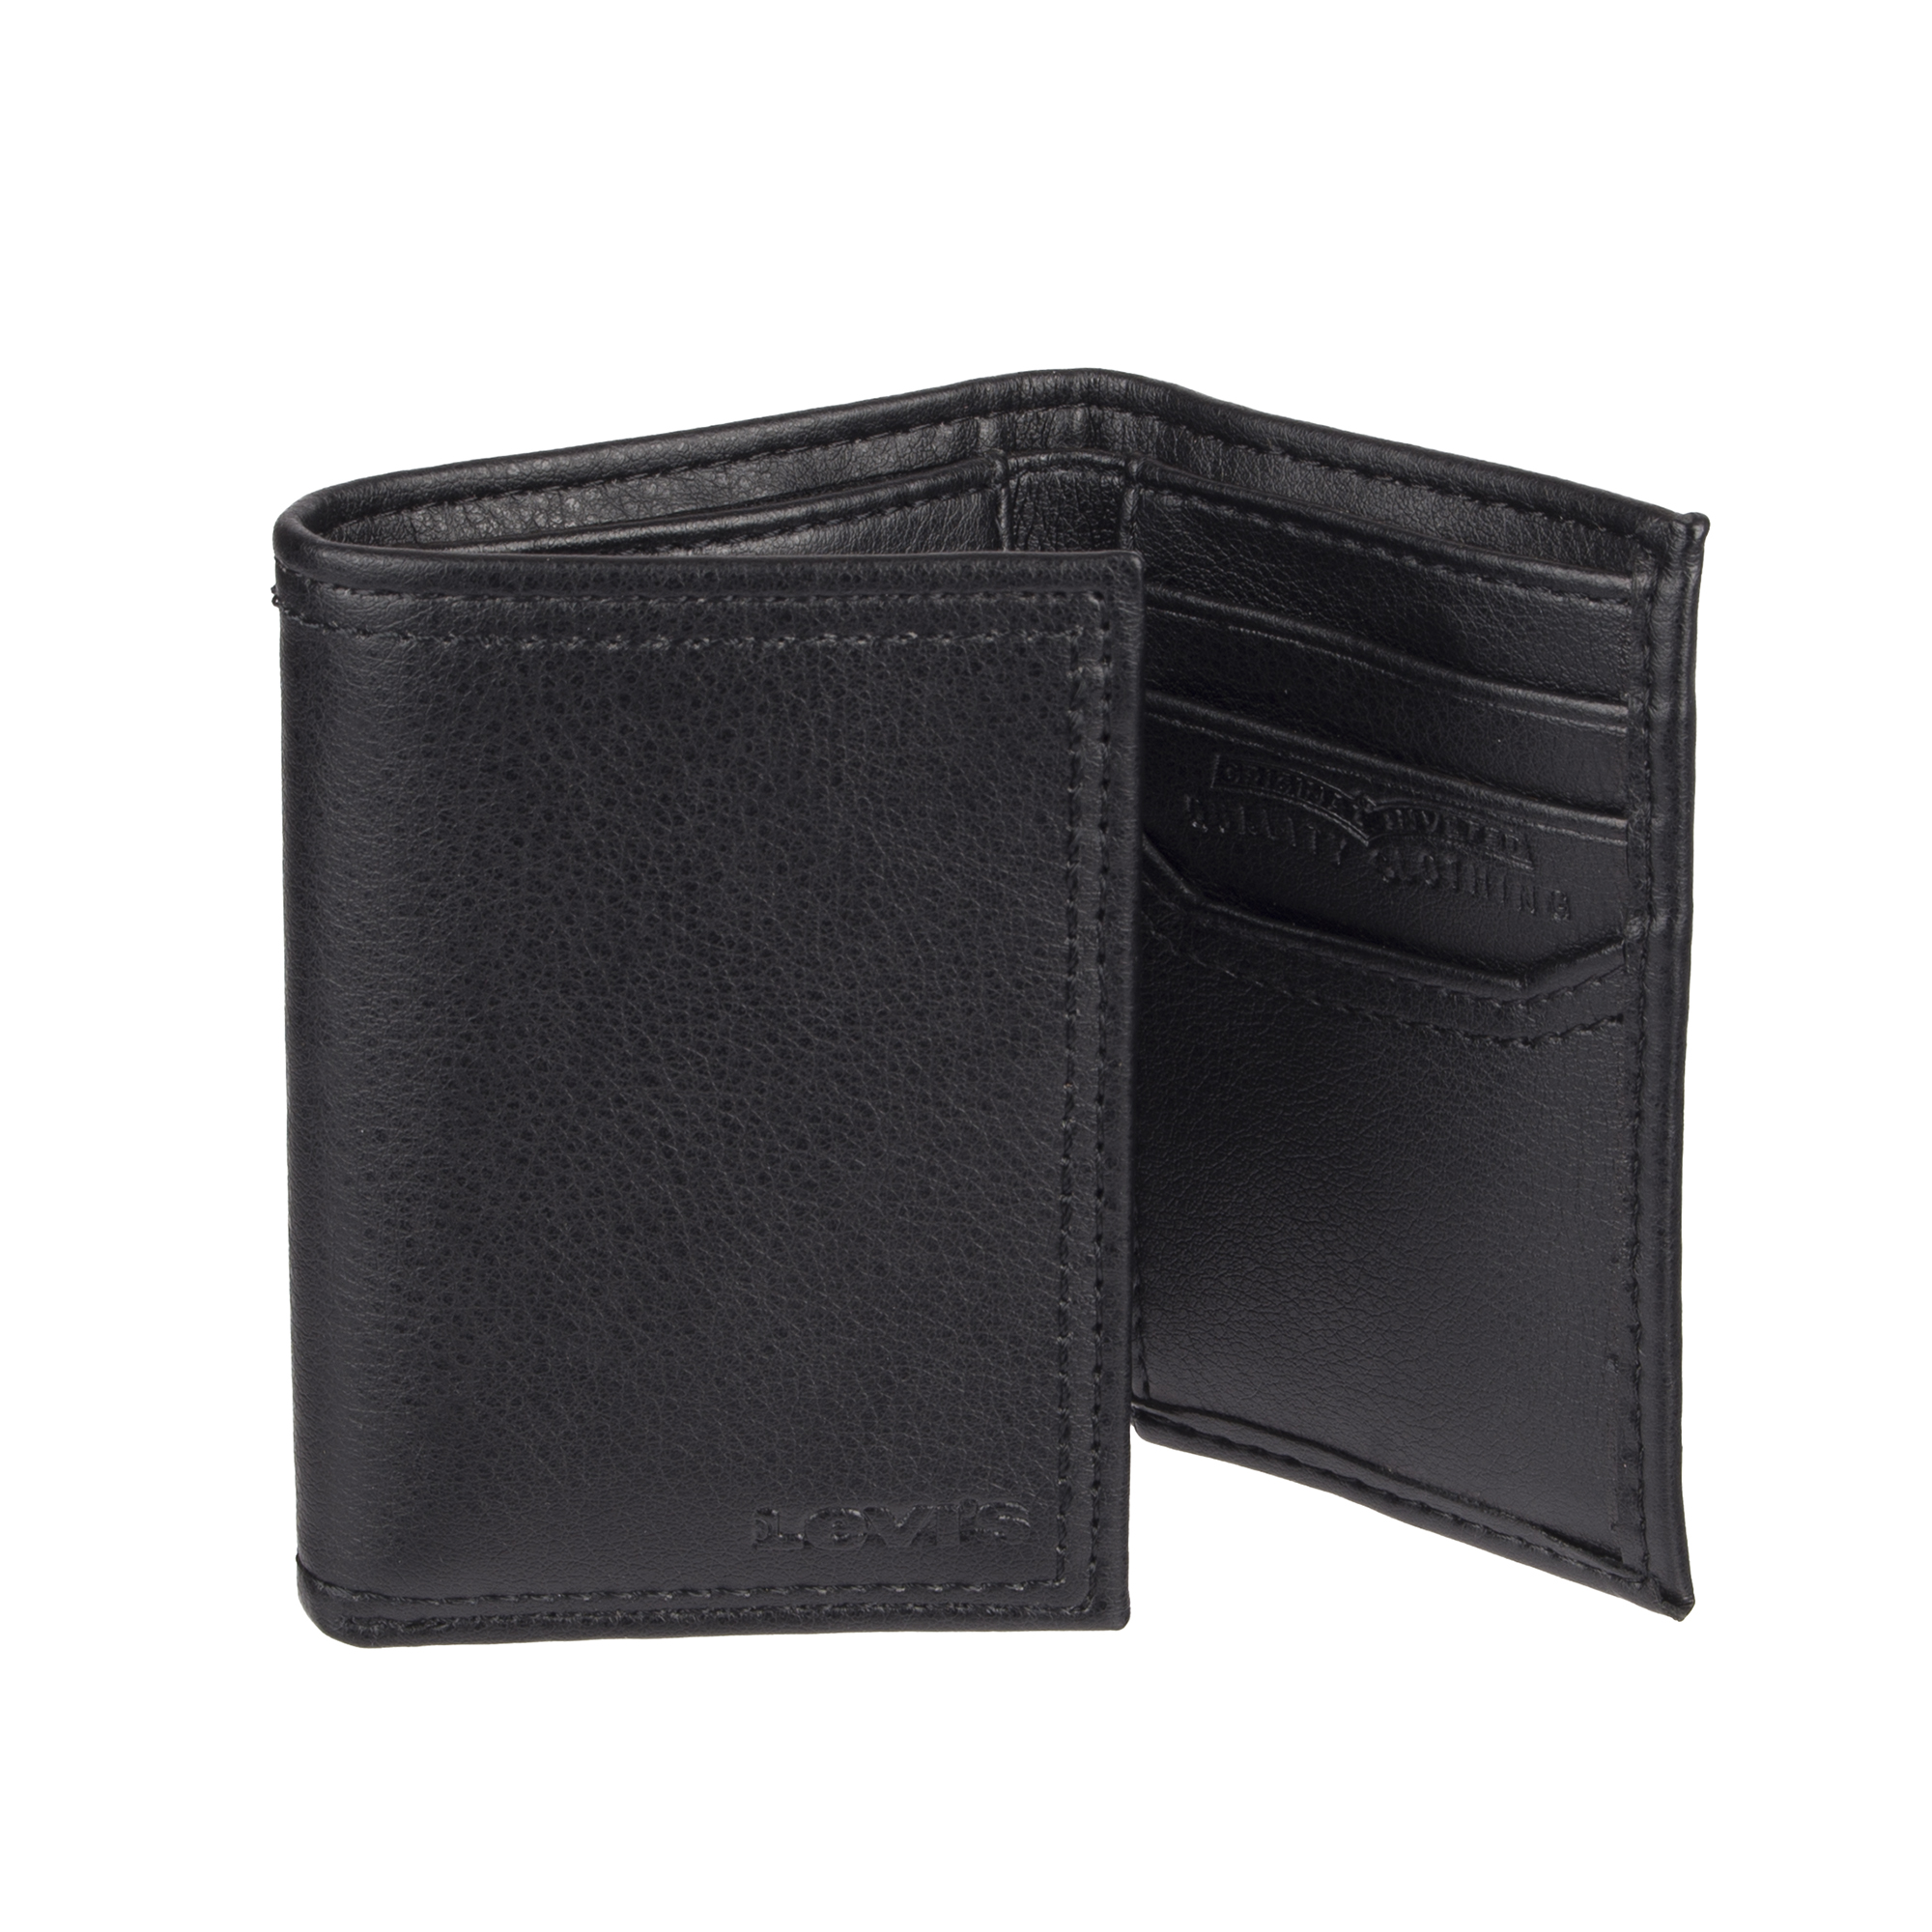 Levi's Men's Black RFID Trifold Wallet with Interior Zipper - image 5 of 5